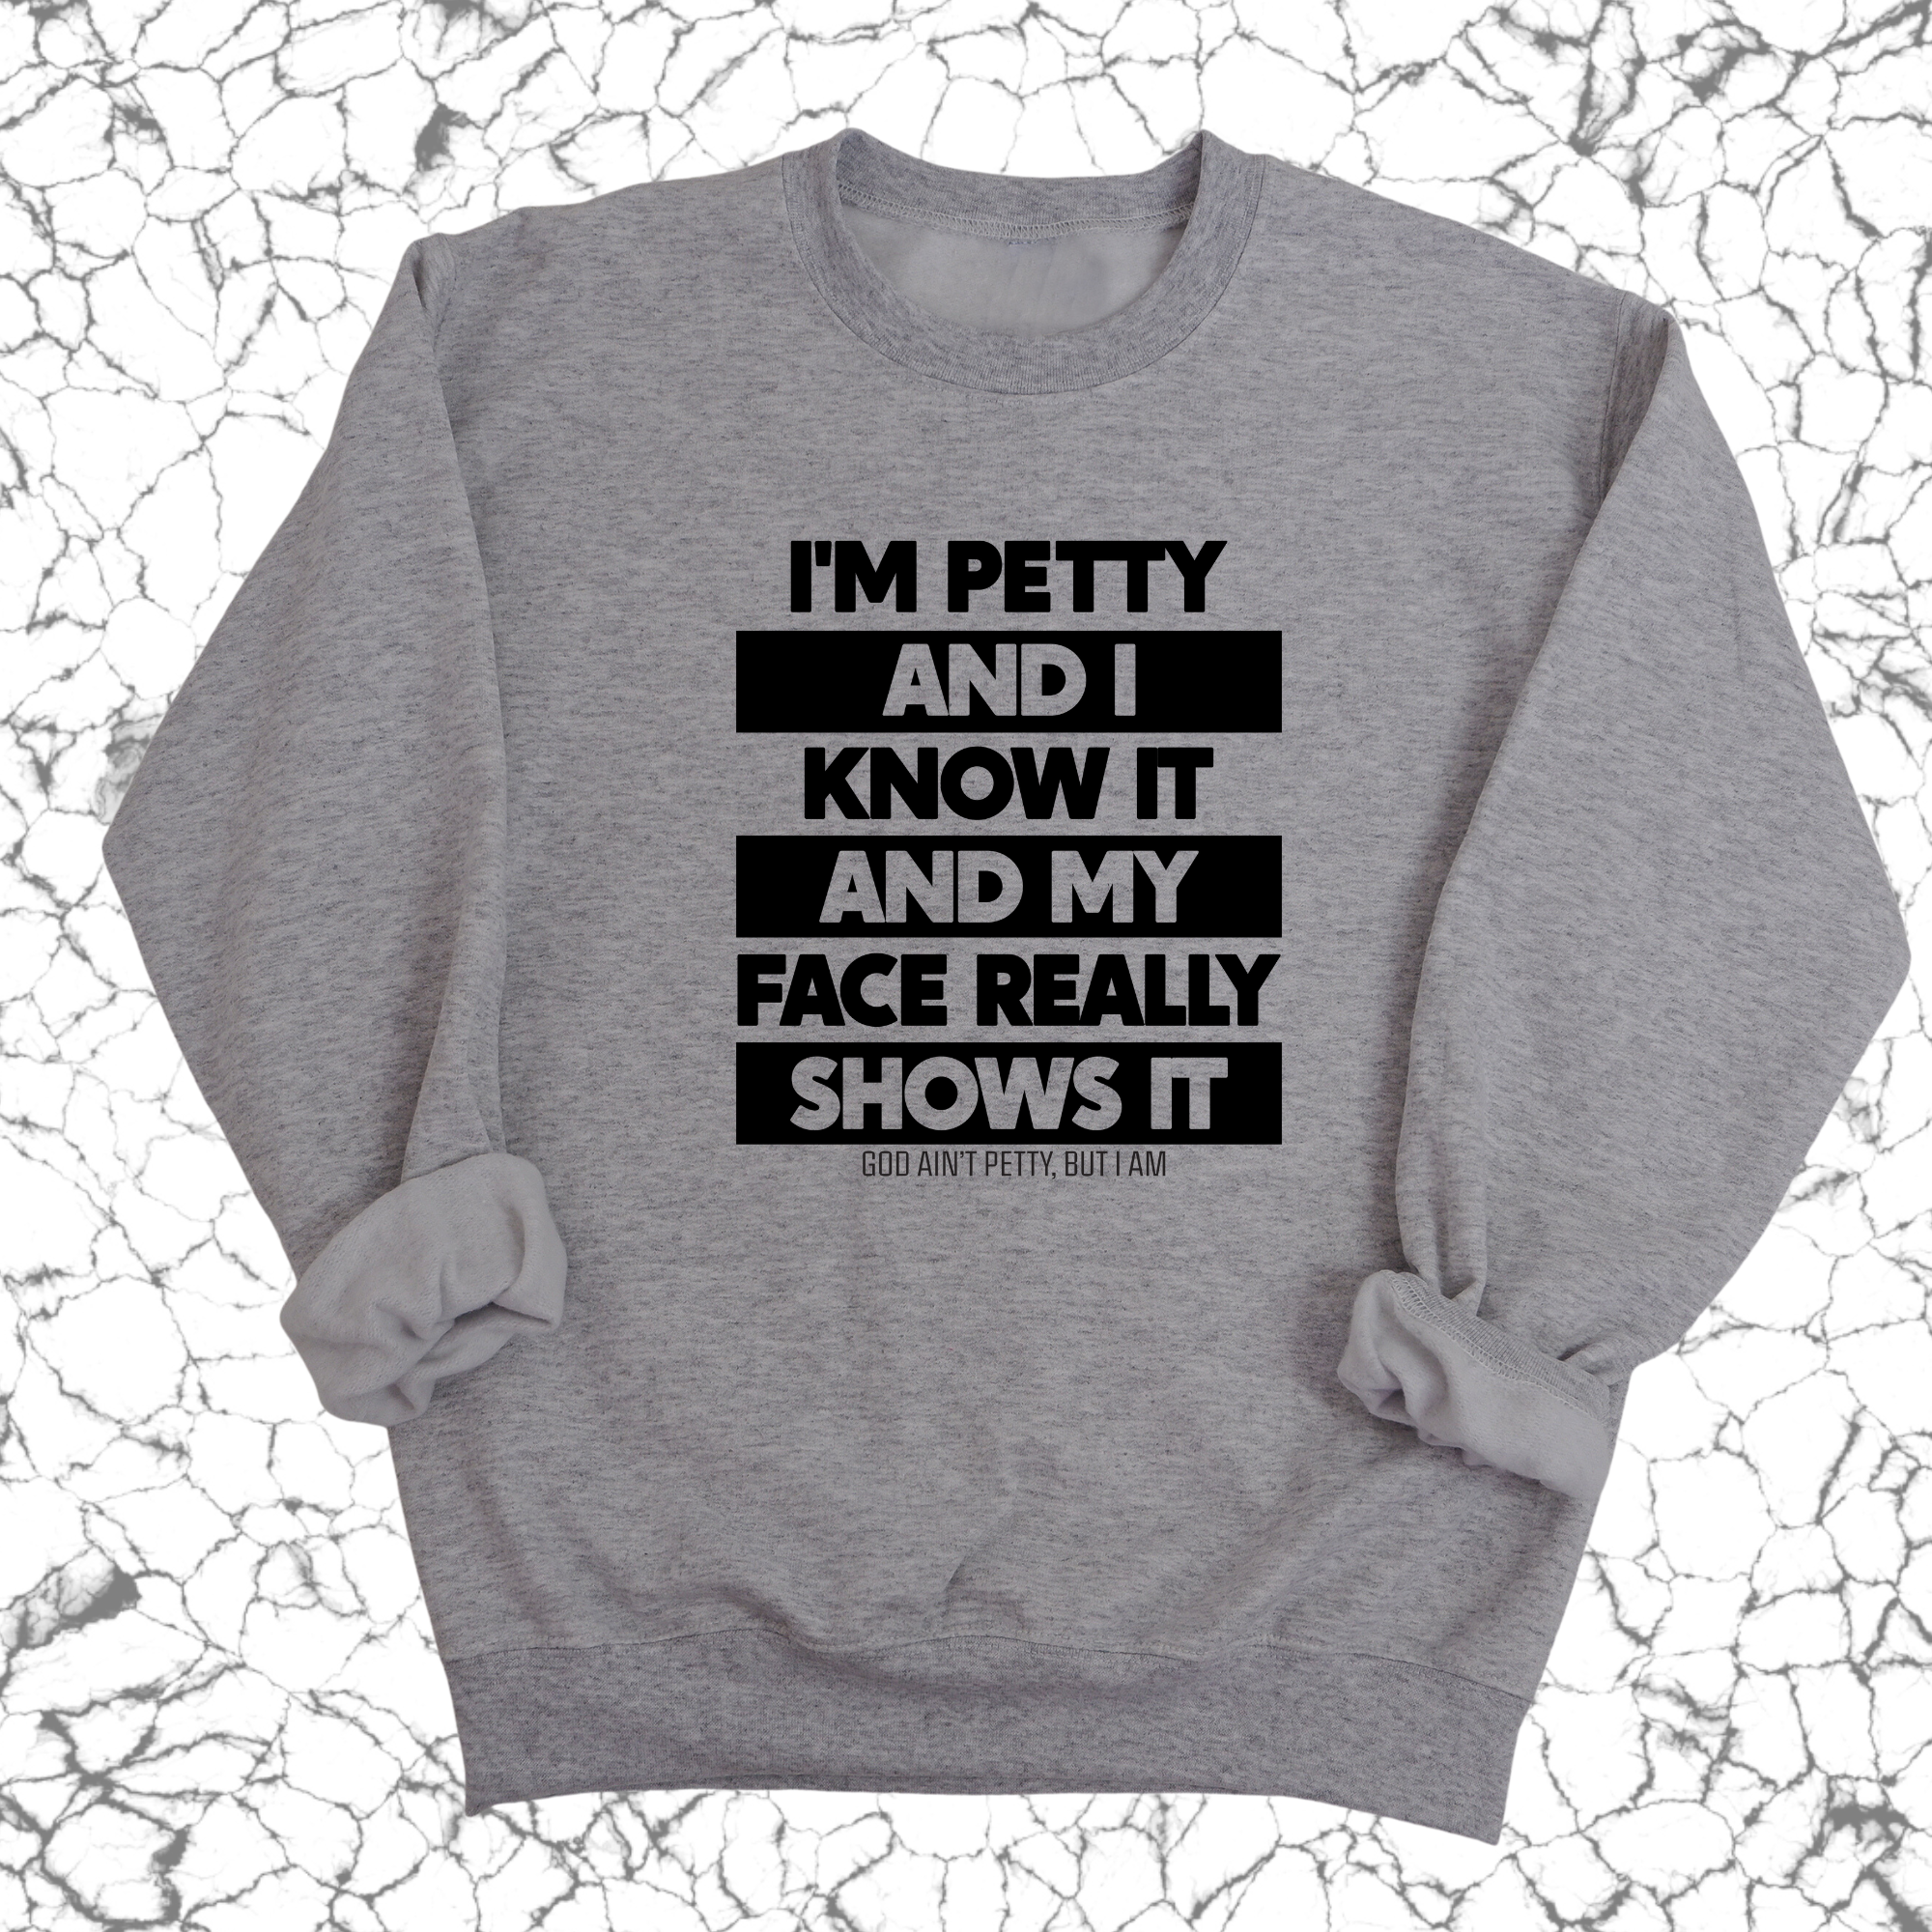 I'm petty and I know it and my petty face really shows it Unisex Sweatshirt-Sweatshirt-The Original God Ain't Petty But I Am